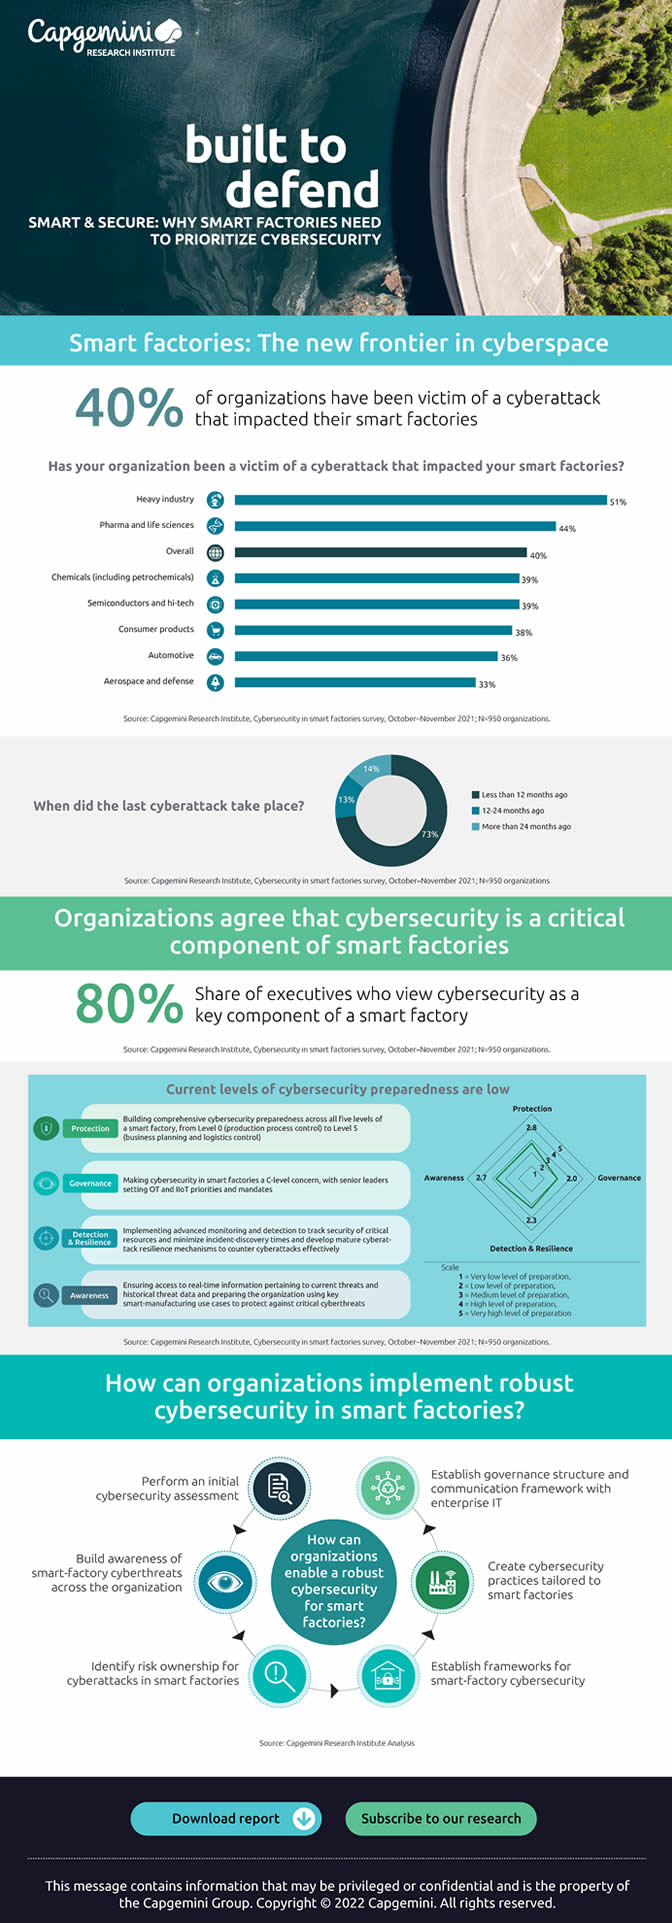 Infographic Smart and Secure Why smart factories need to prioritize cybersecurity - source and courtesy - Capgemini Research Institute